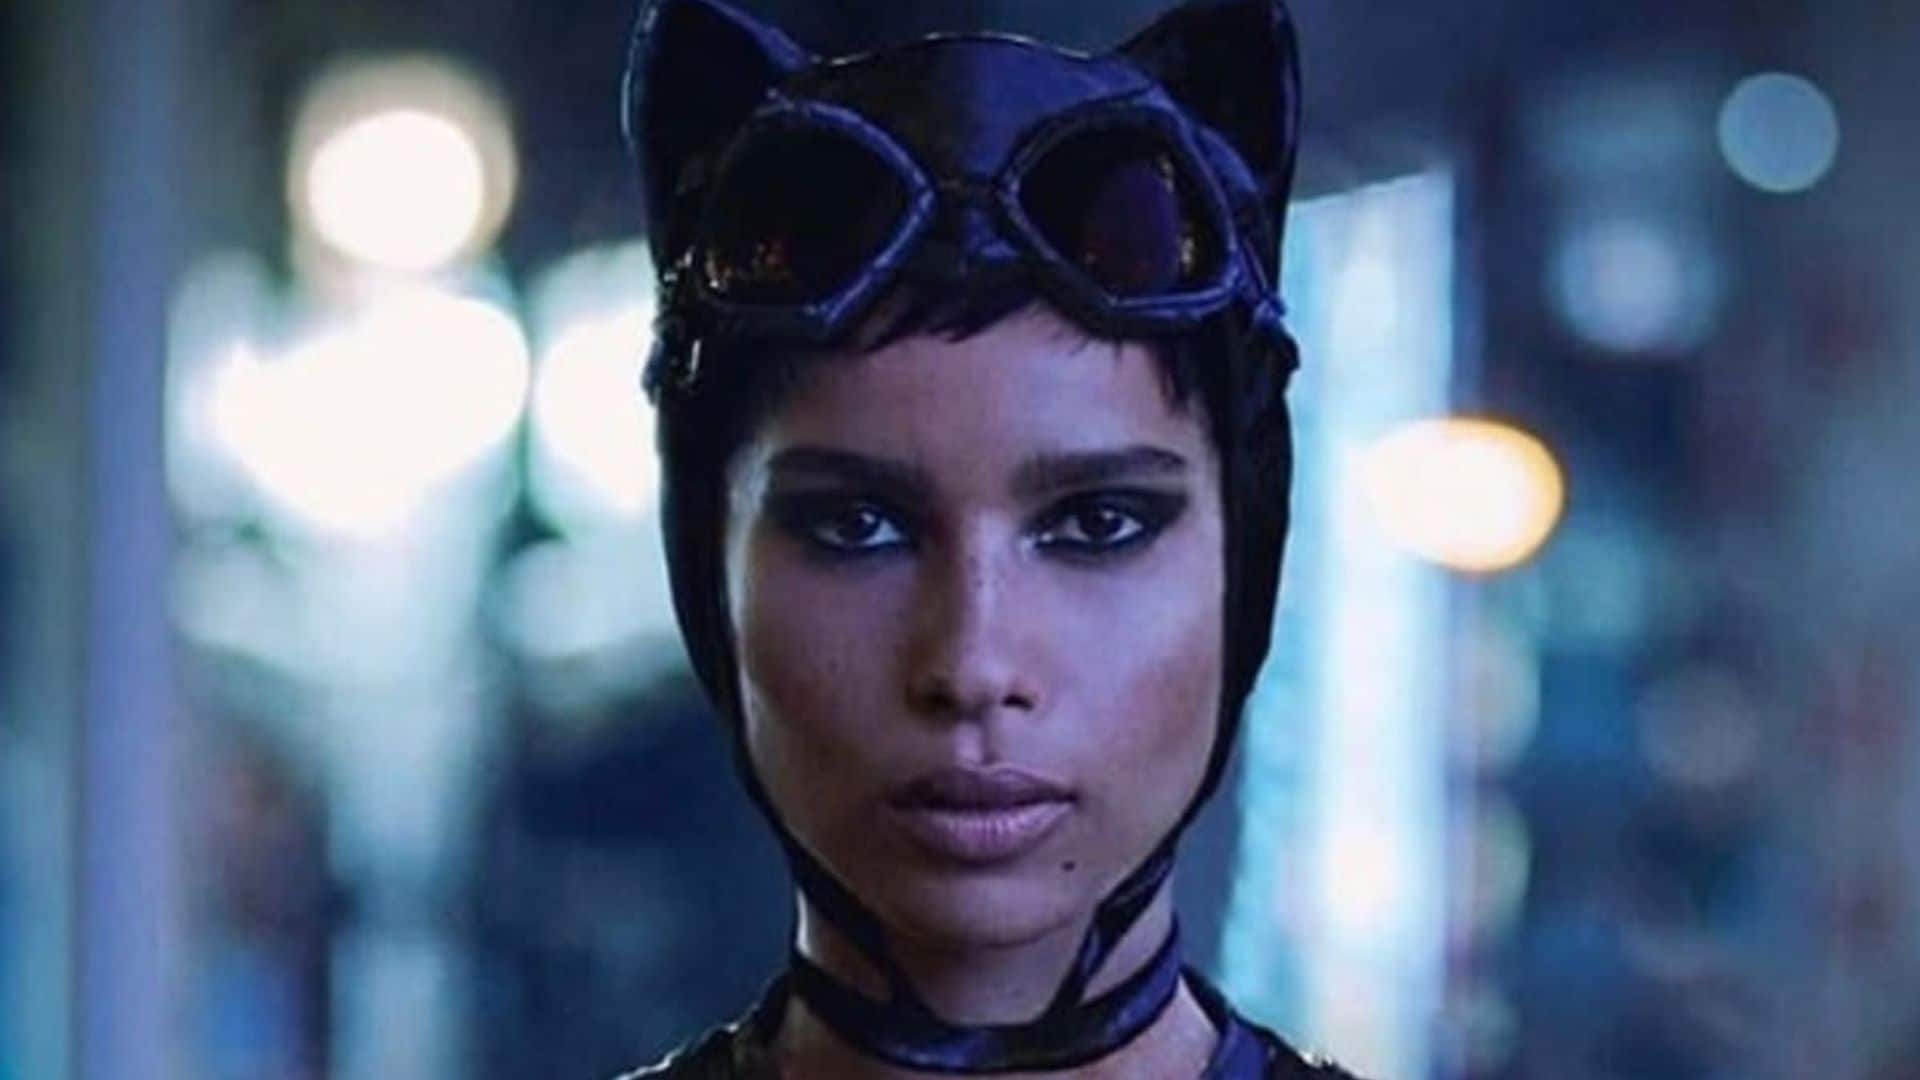 Catwoman: Zoë Kravitz studied cats and lions fighting to prepare for the role